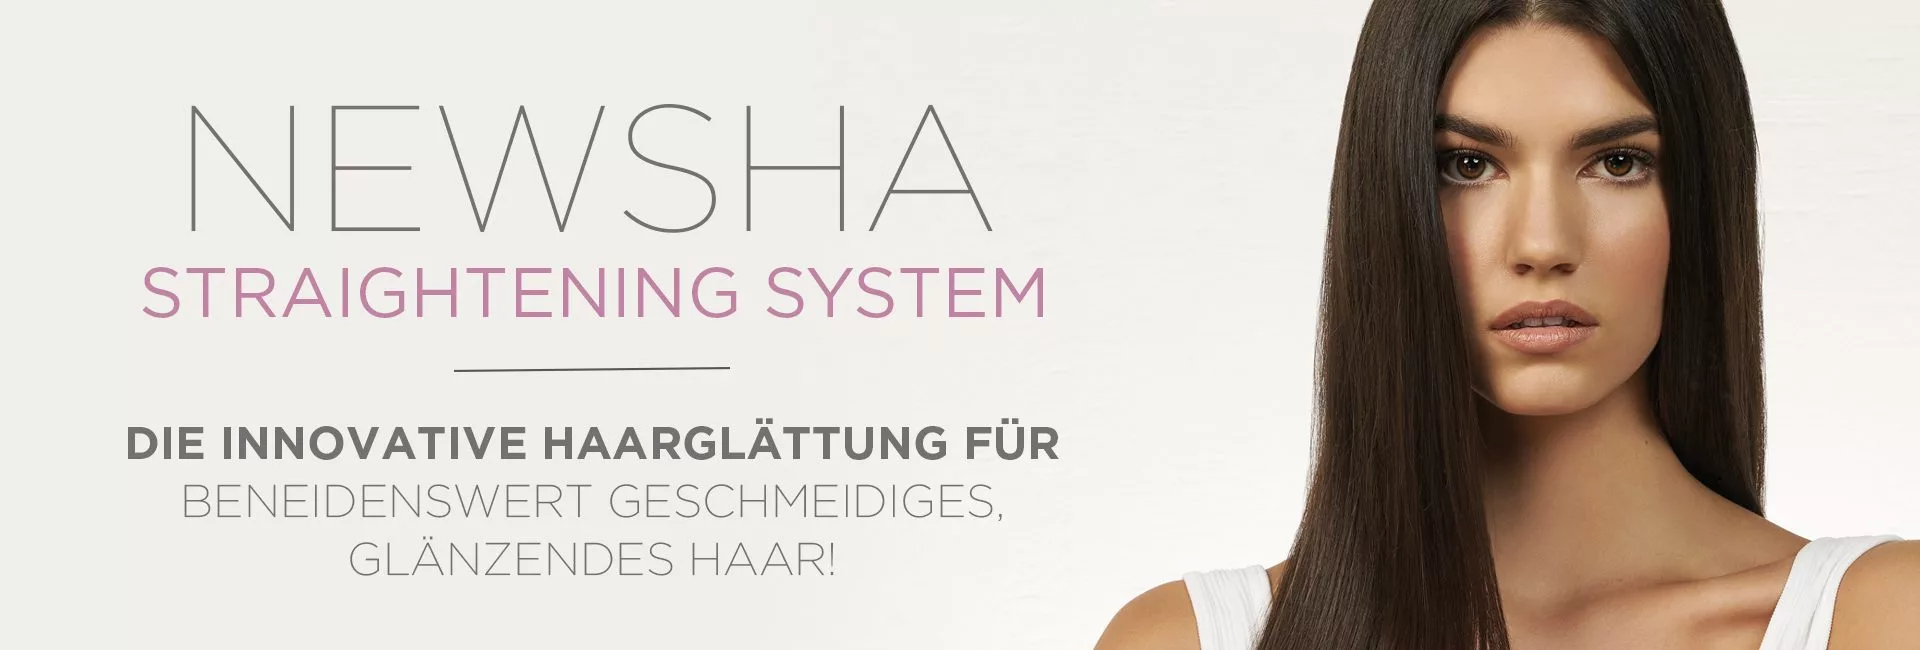 A girl with Newsha straightening system banner